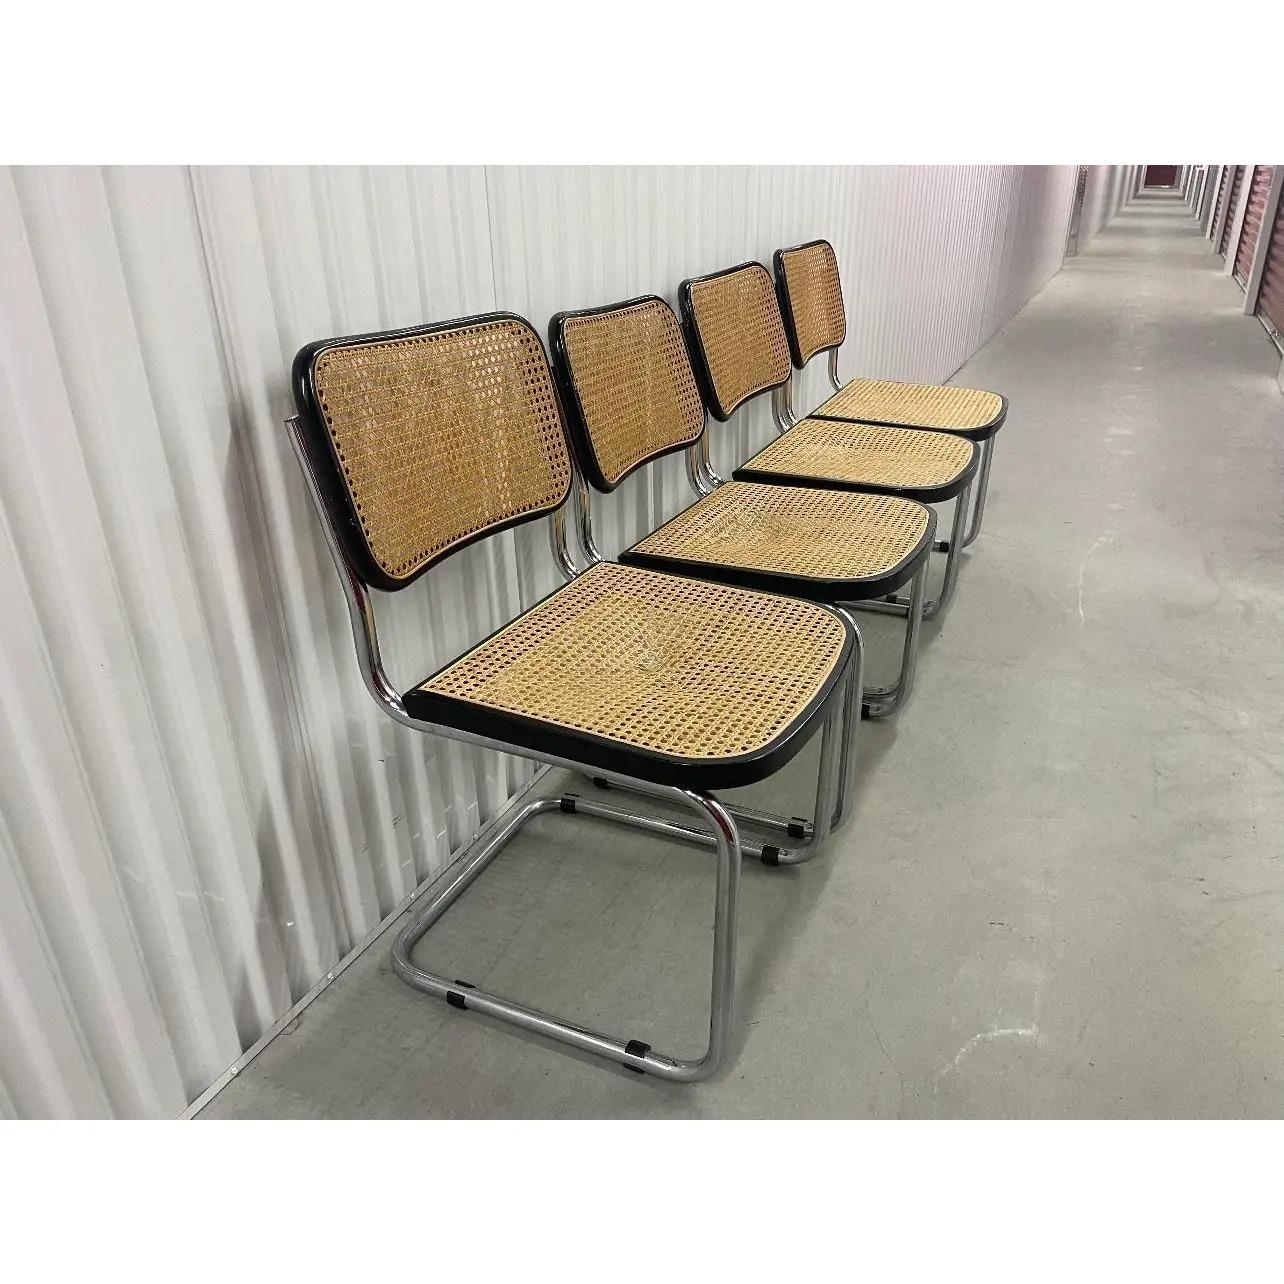 These iconic 1970s Italian Marcel Breuer Cesca dining chairs will add a dash of elegance to any home or office. They are beautifully simplistic yet ingenious in their design.